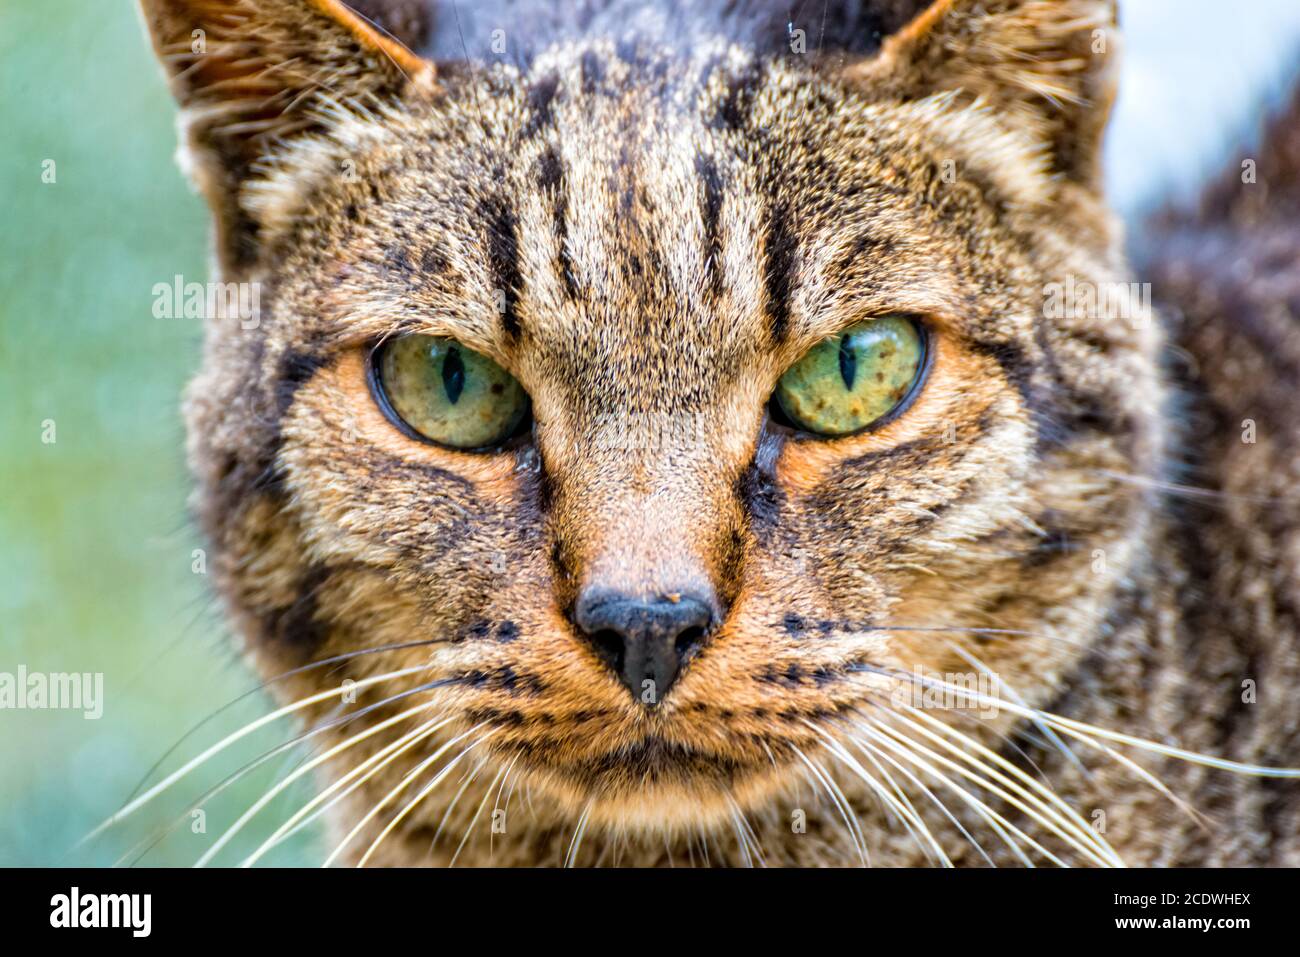 House cat with green eyes looking straight forward Stock Photo